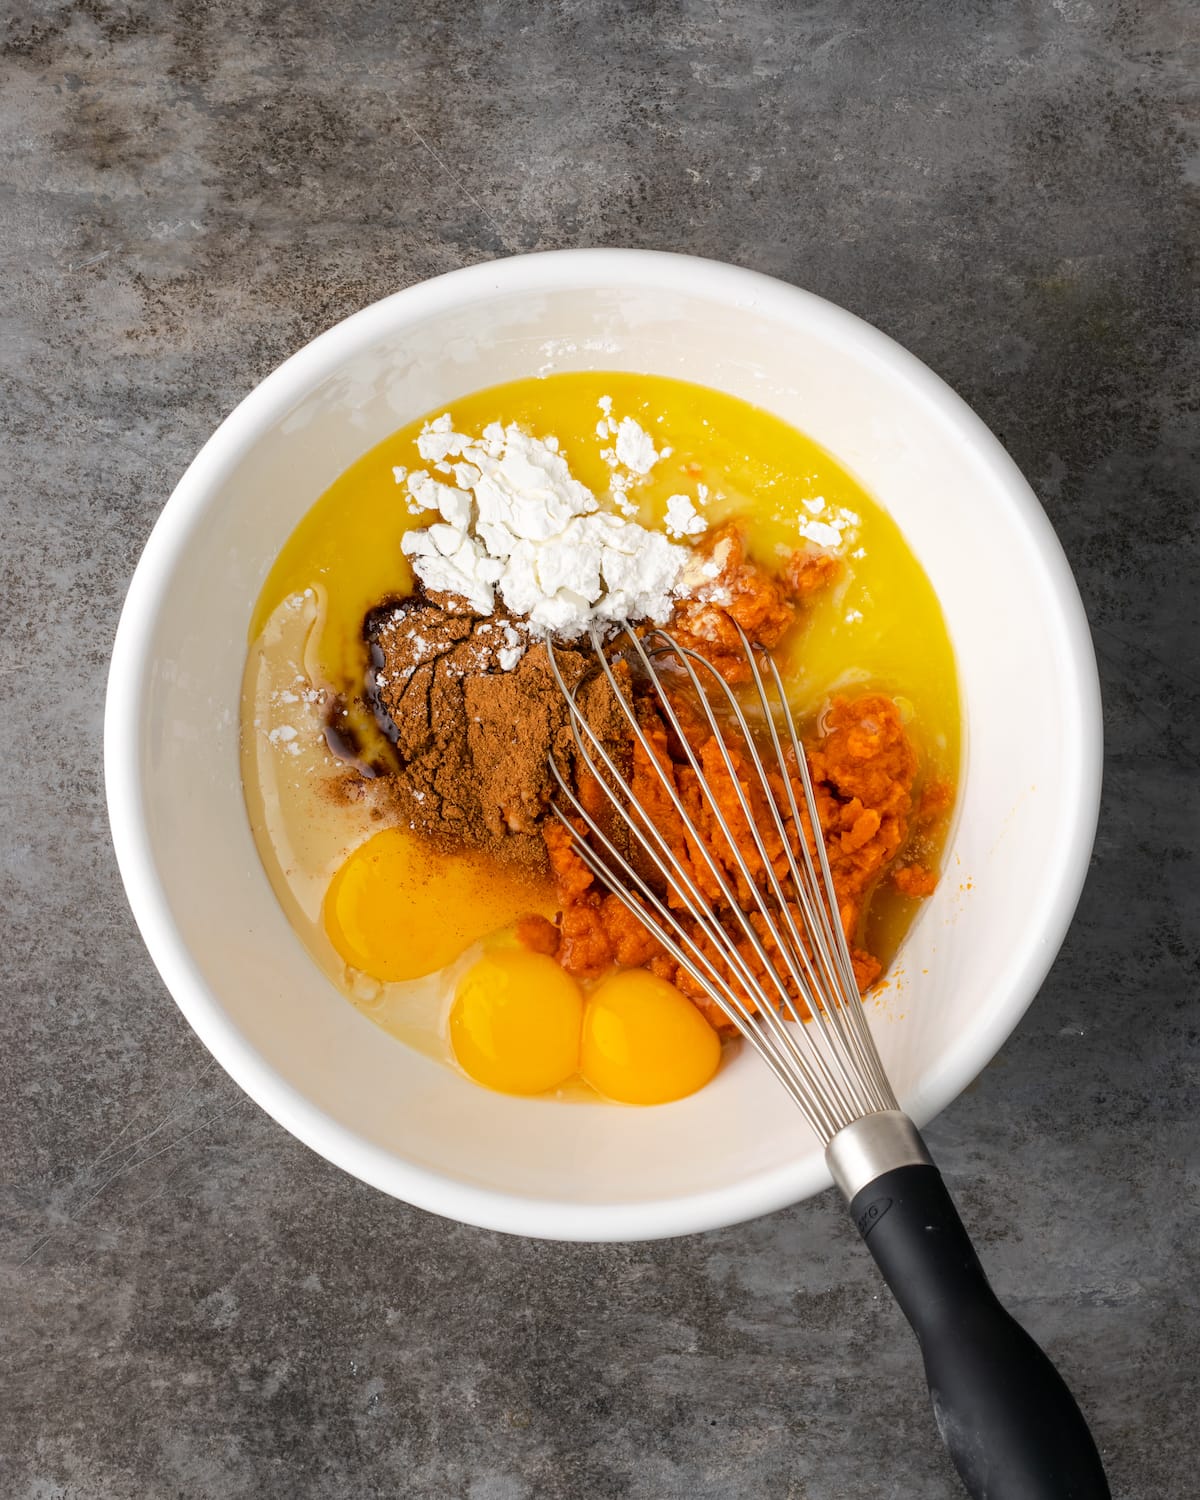 The ingredients for pumpkin pie filling combined in a mixing bowl with a whisk.